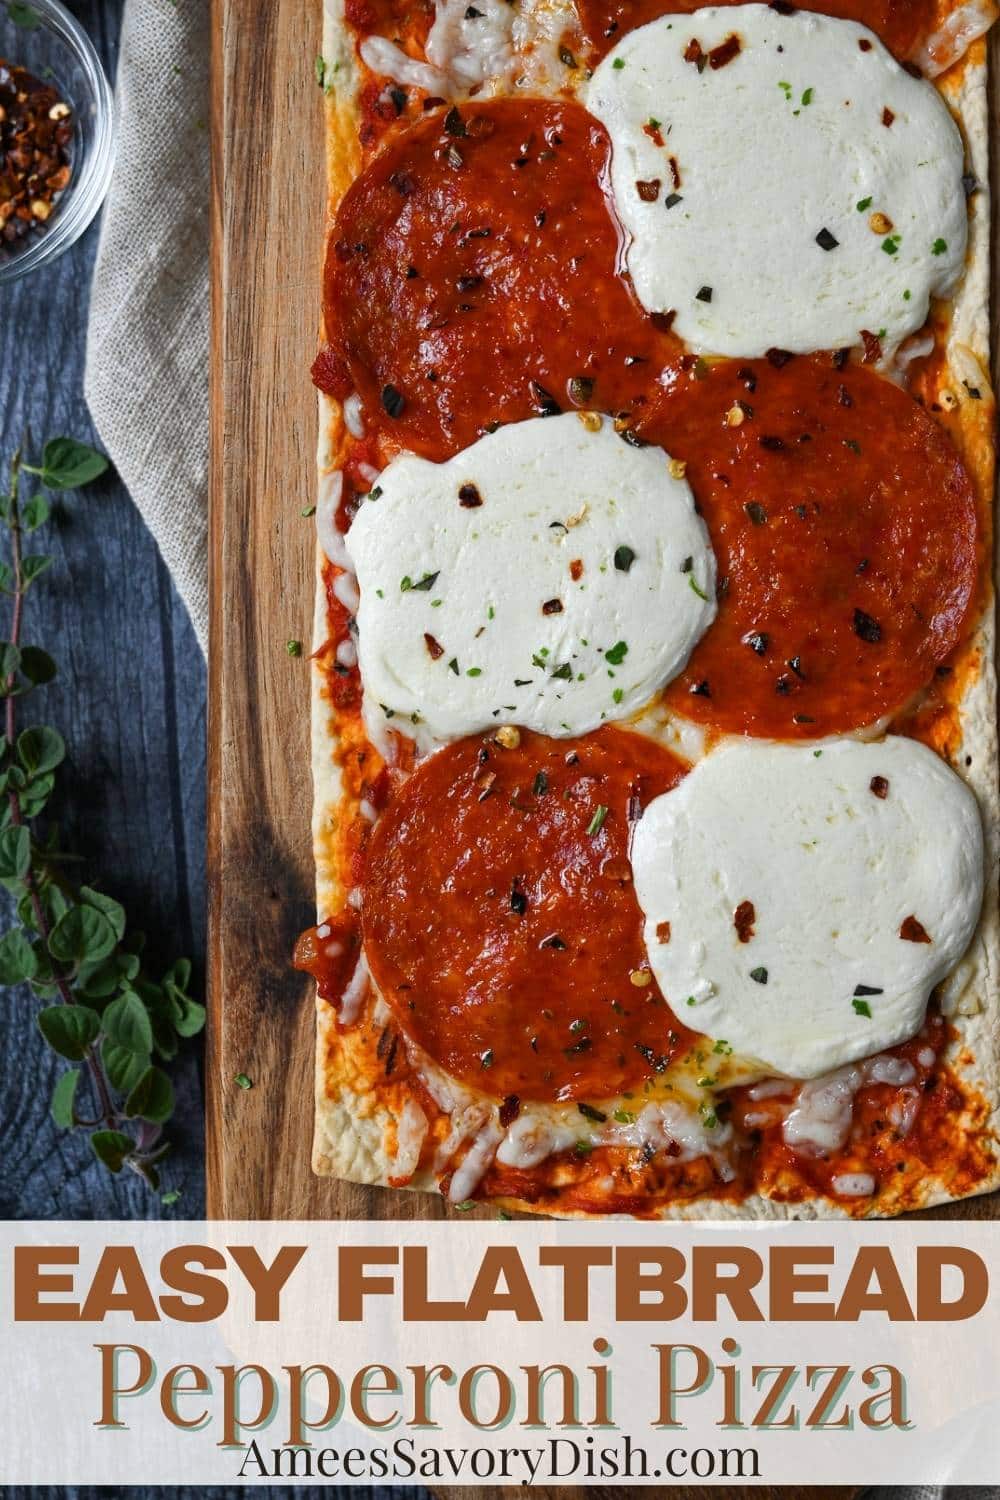 This delicious pepperoni flatbread pizza recipe has less than 450 calories per serving and packs 26 grams of protein!  via @Ameessavorydish